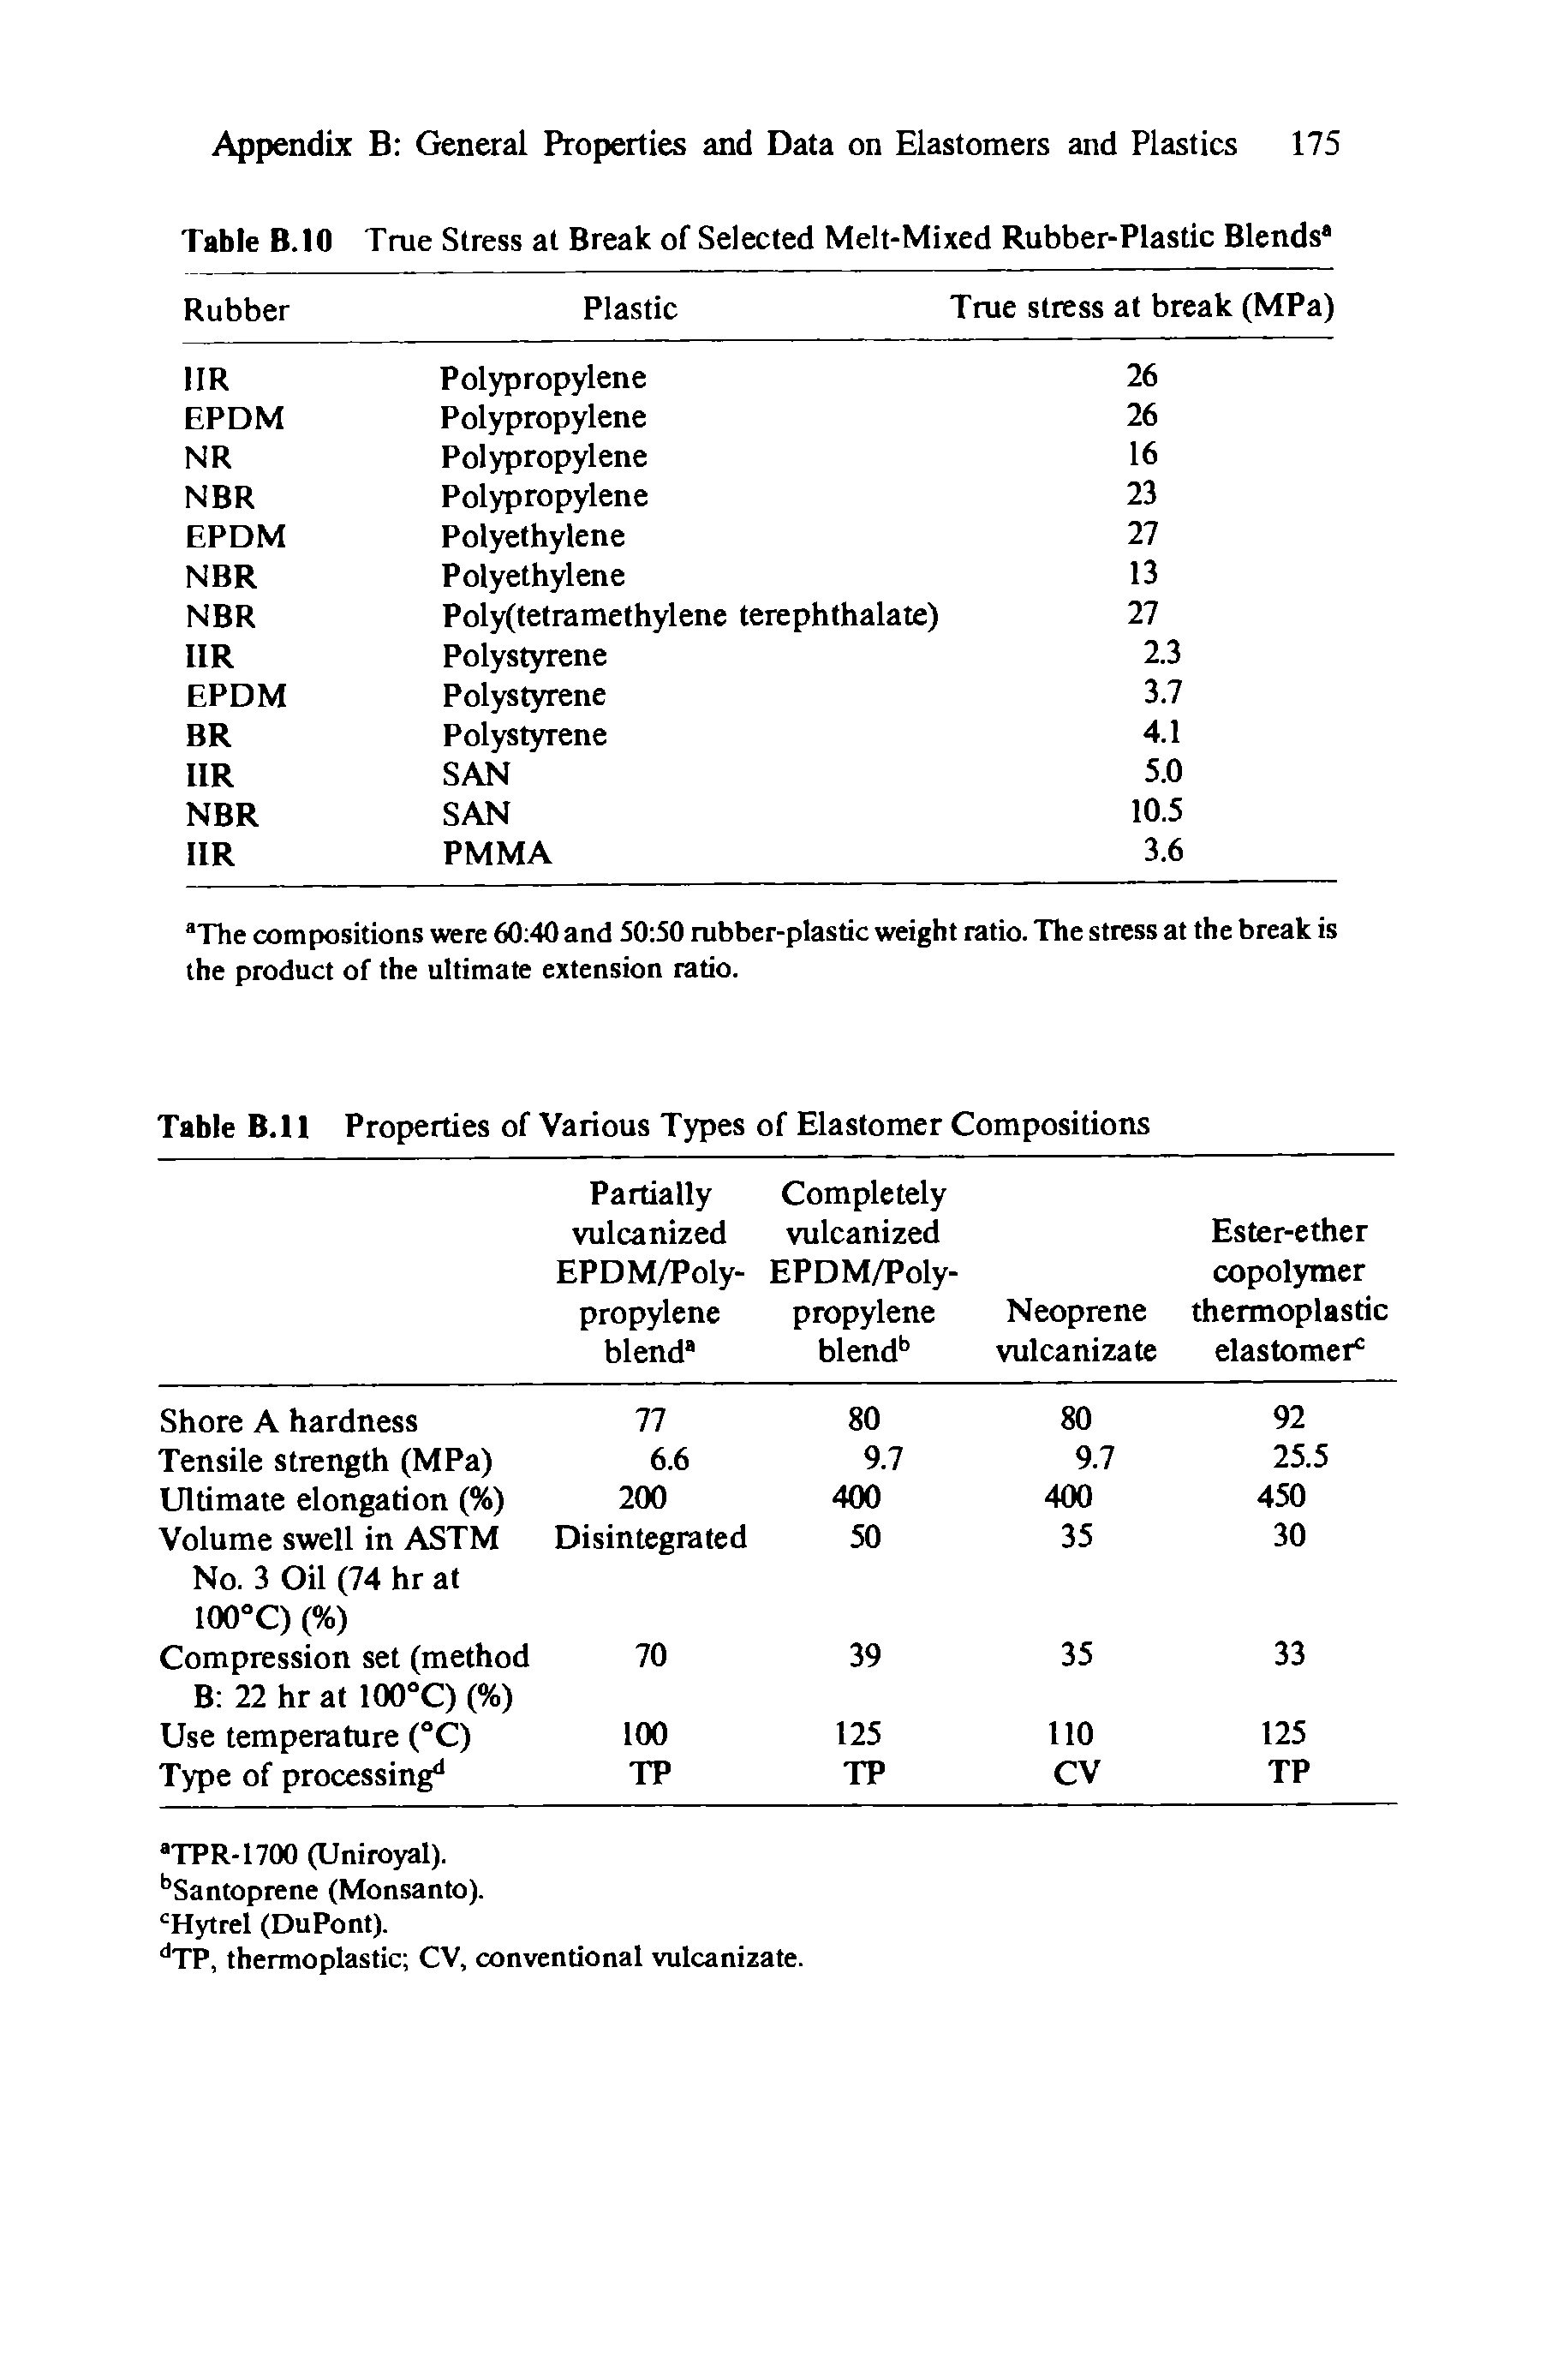 Table B.ll Properties of Various Types of Elastomer Compositions...